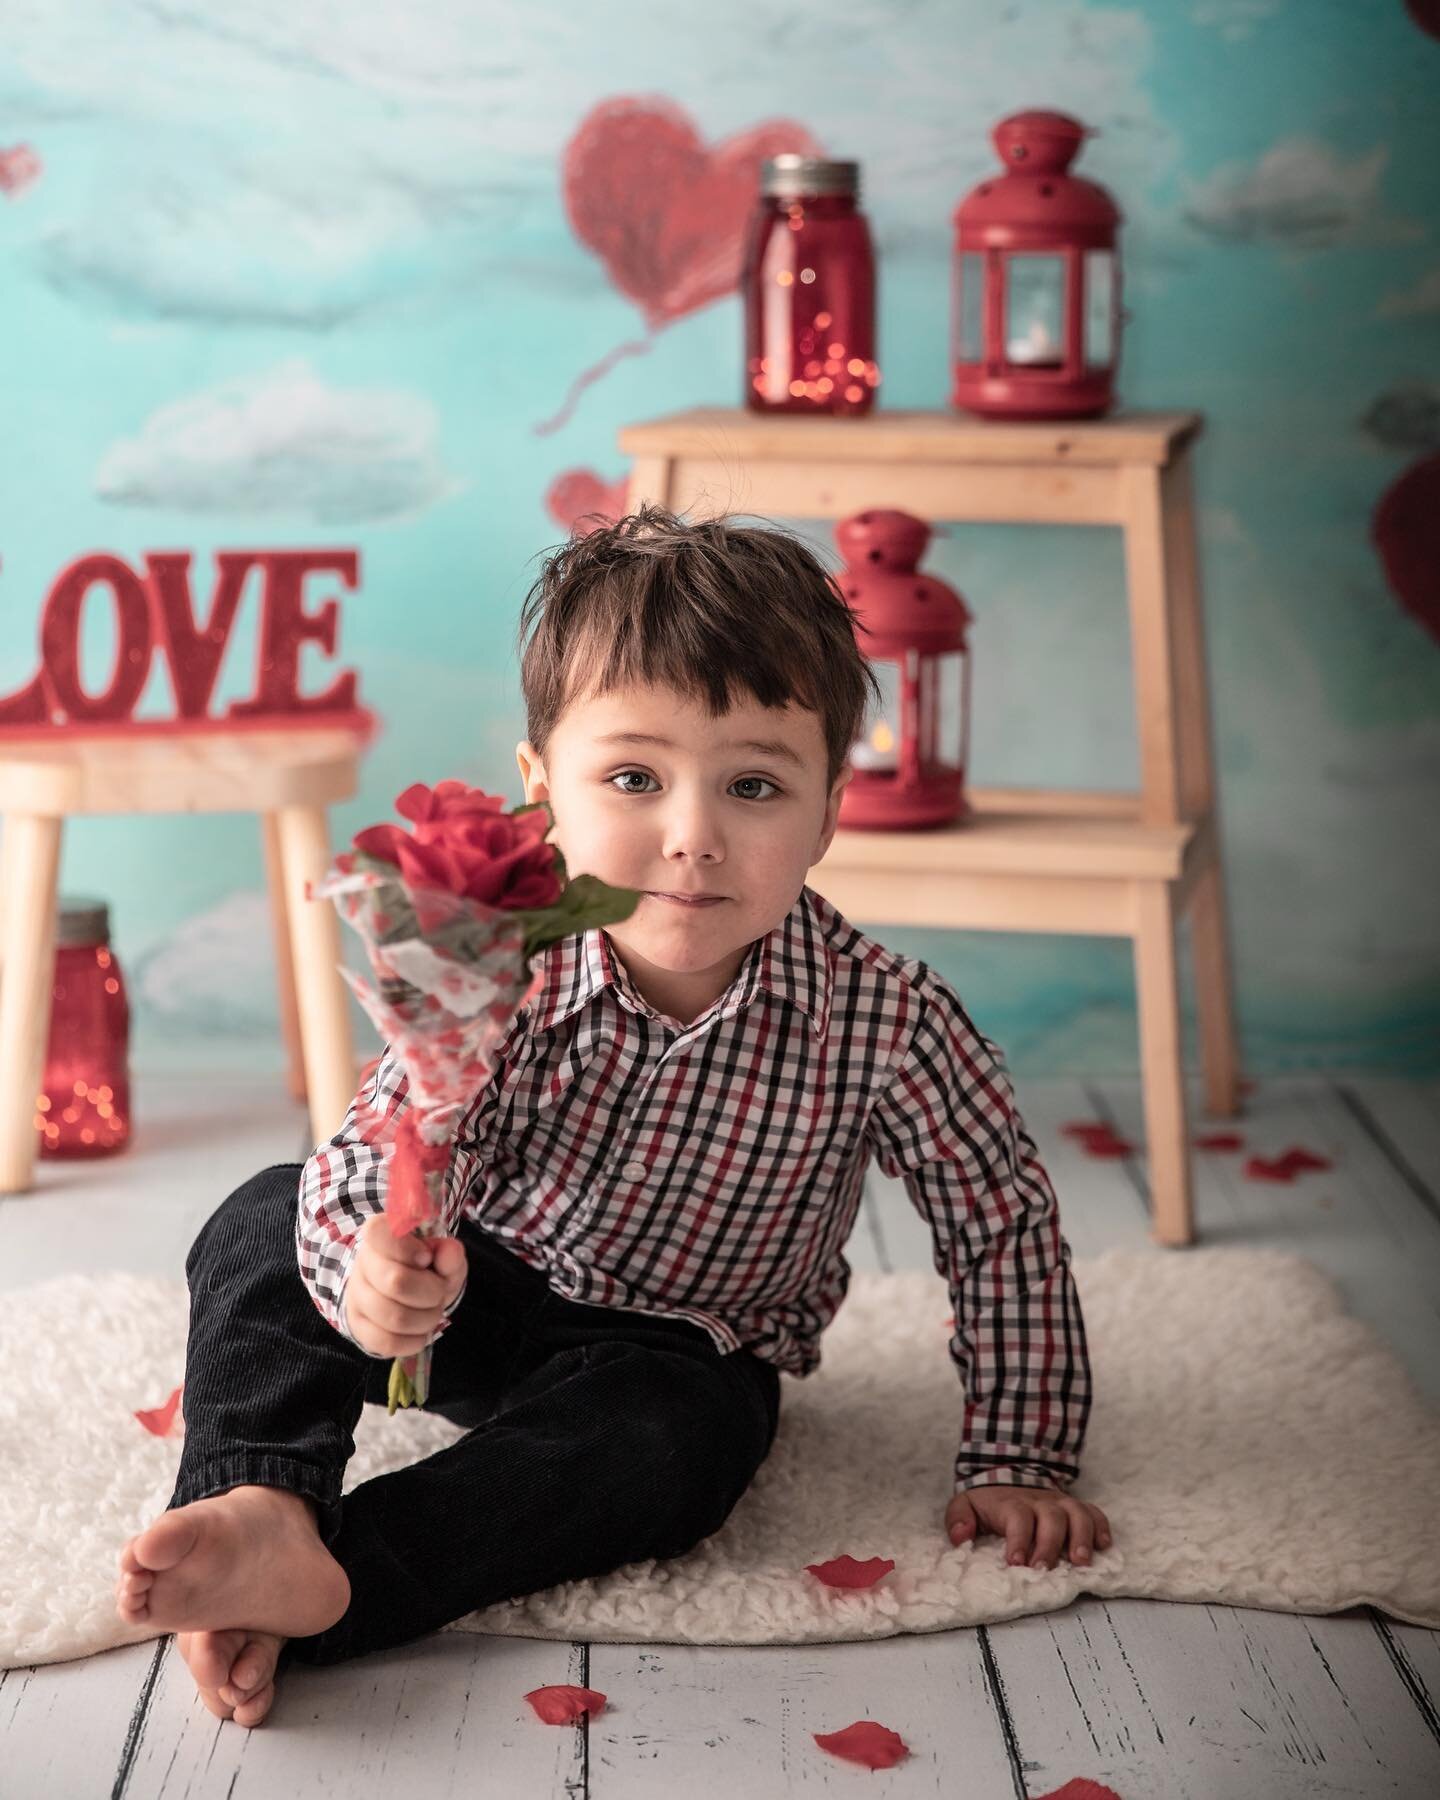 Happy Valentine&rsquo;s Day from my little loves to yours! &hearts;️&hearts;️&hearts;️. See more from this session on my Facebook page!

.
.
.
.
.
.
.
#yyc #calgaryphotographer #happyvalentinesday #valentines2021 #catandboy #igerscalgary #sharecalgar